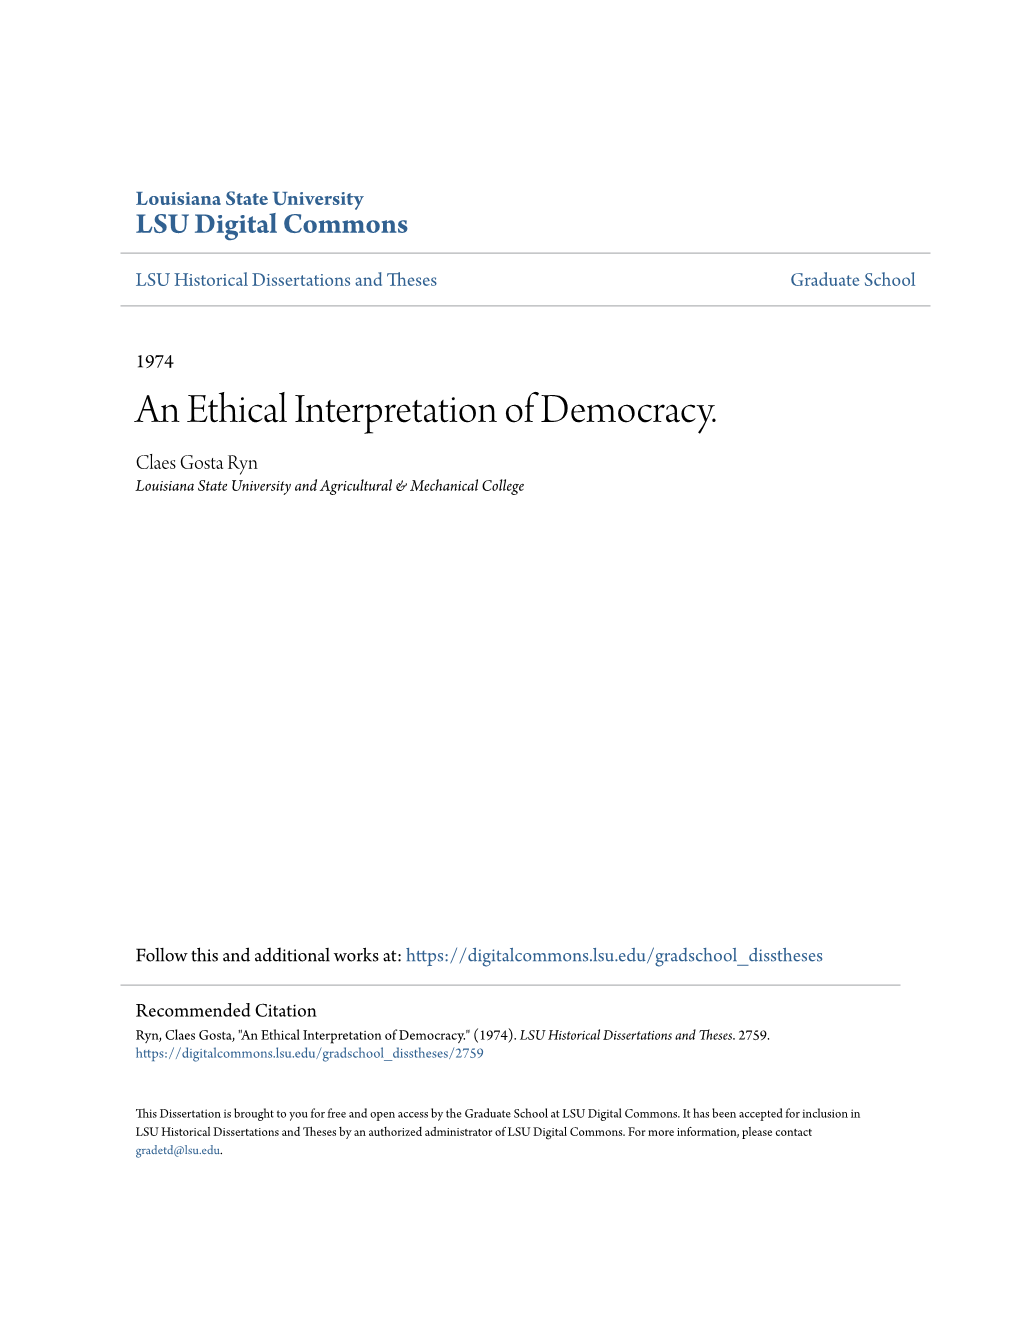 An Ethical Interpretation of Democracy. Claes Gosta Ryn Louisiana State University and Agricultural & Mechanical College